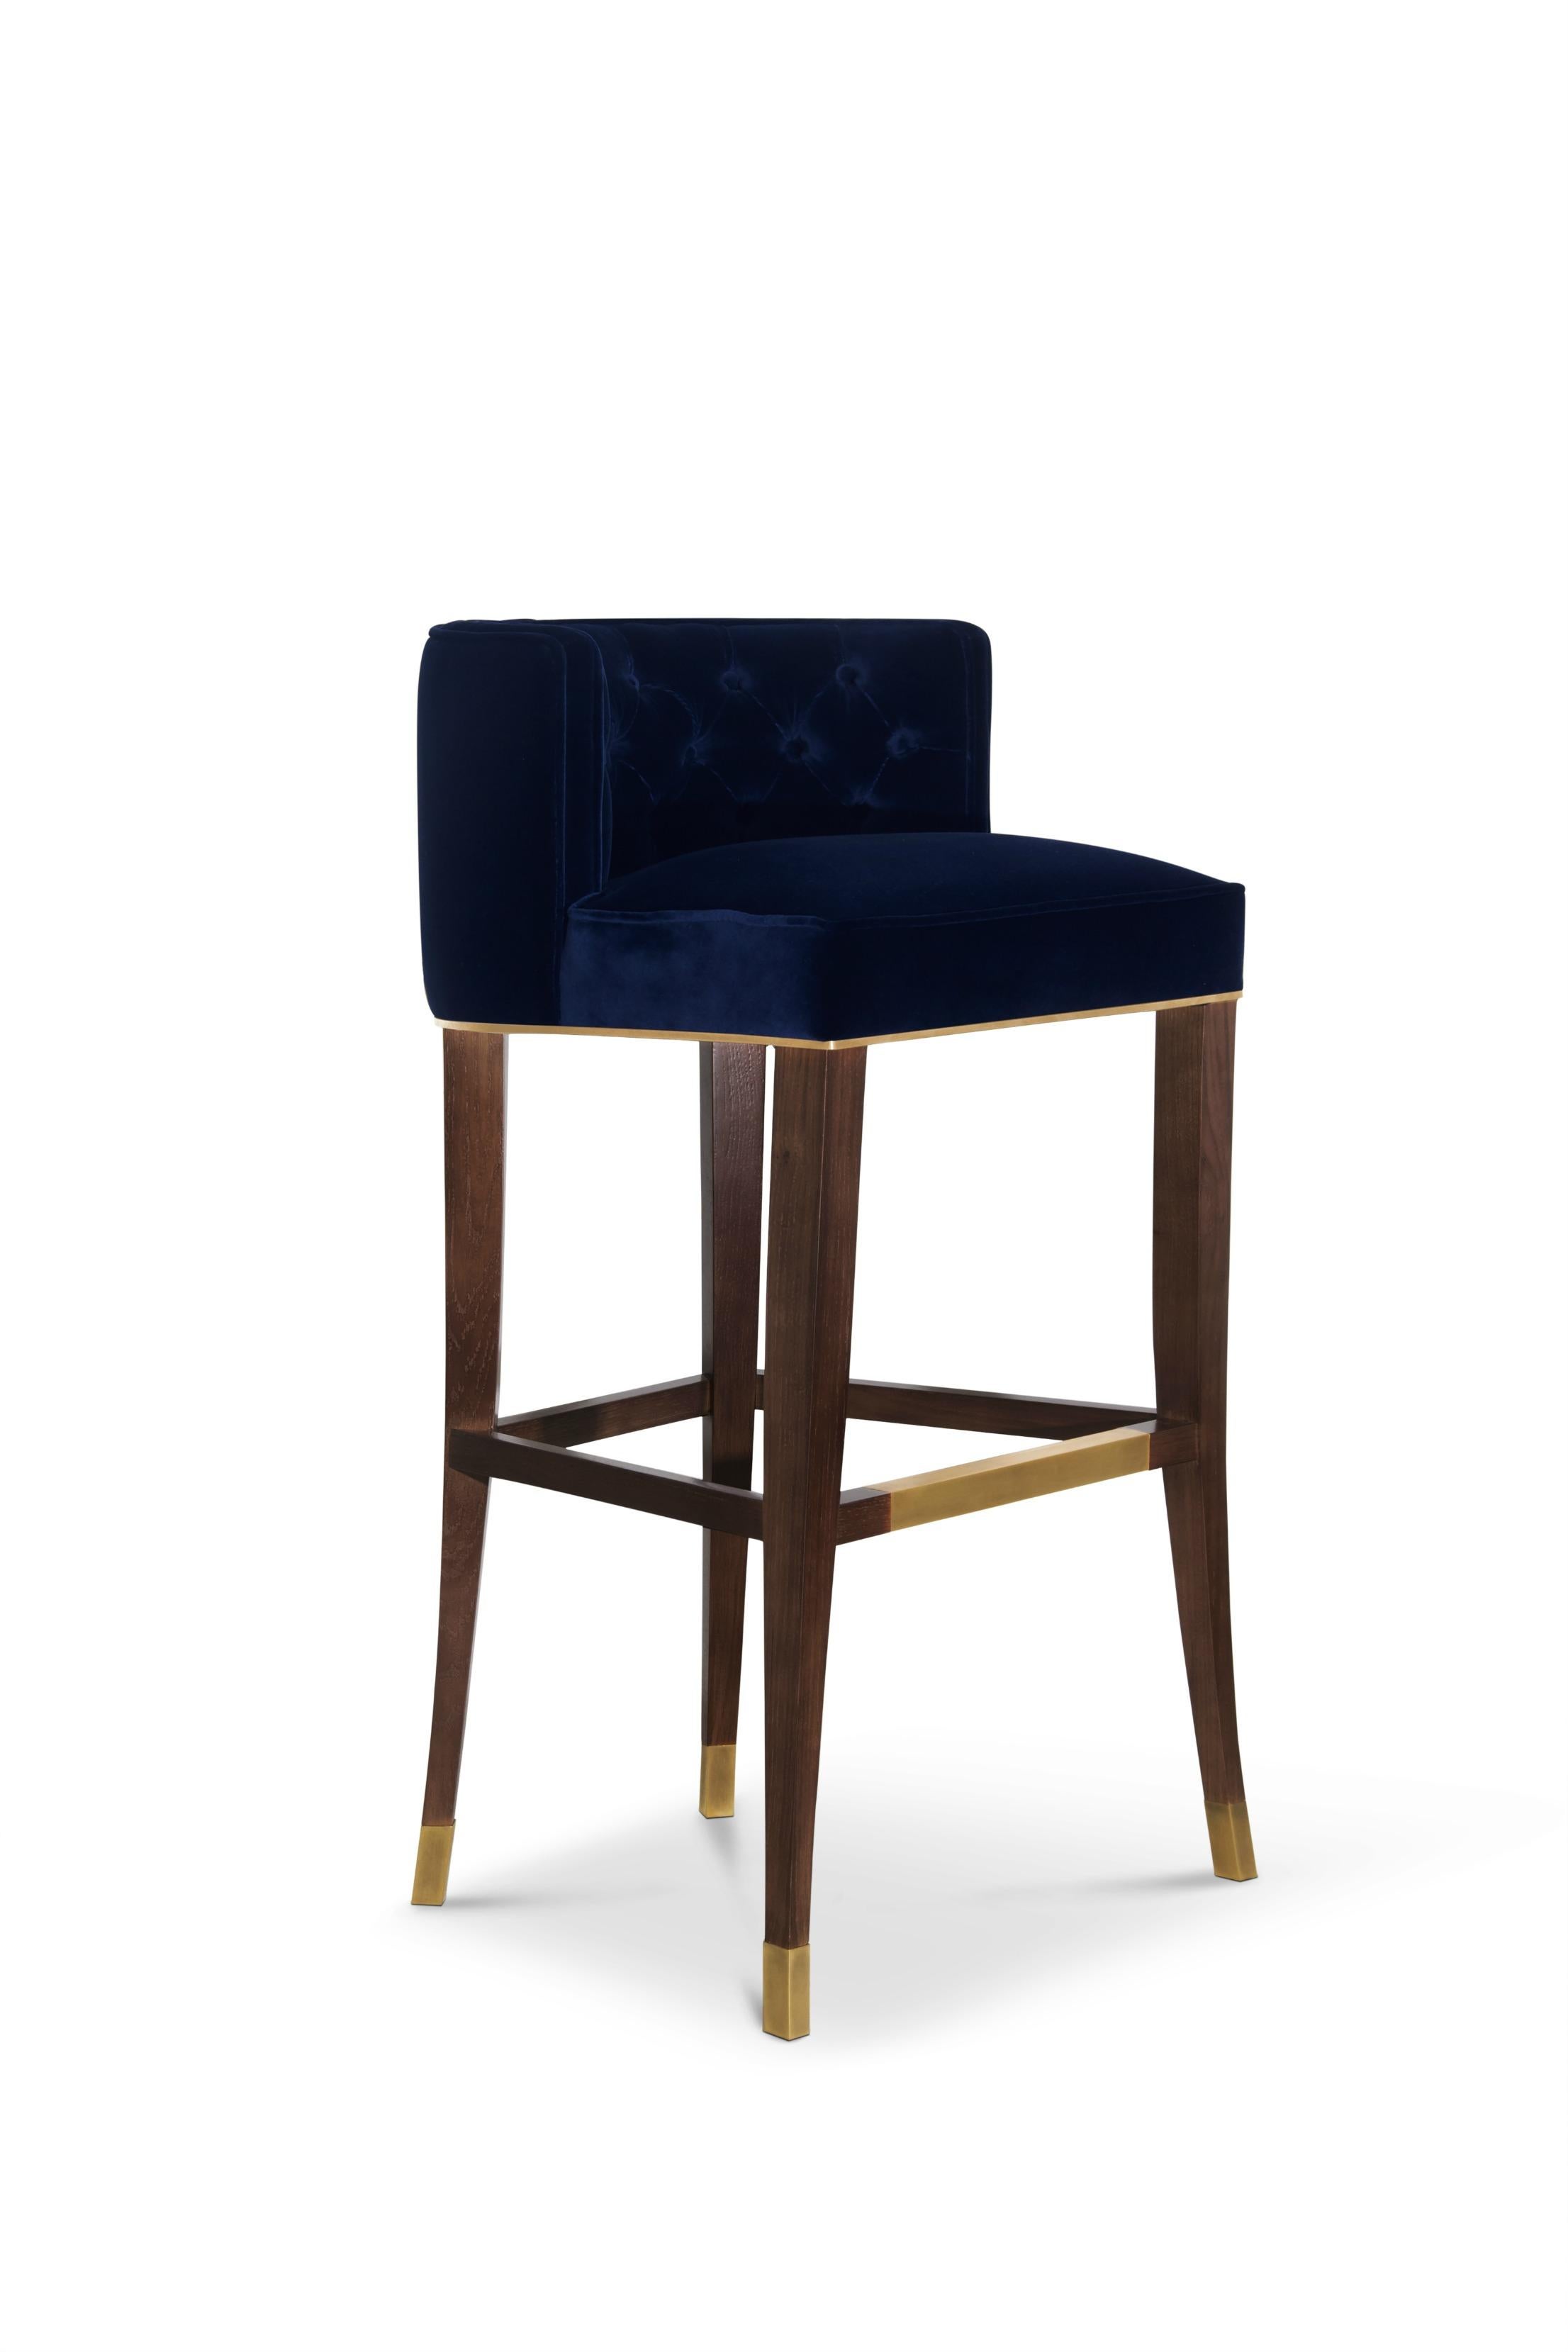 The royalty, class and luxury of the Bourbon dynasty, represented by Louis XIV, inspired the velvet BOURBON bar chair, which makes up any refined ambience.
Legs/Base: Ash with walnut stain matte varnish; Details: Aged brass
